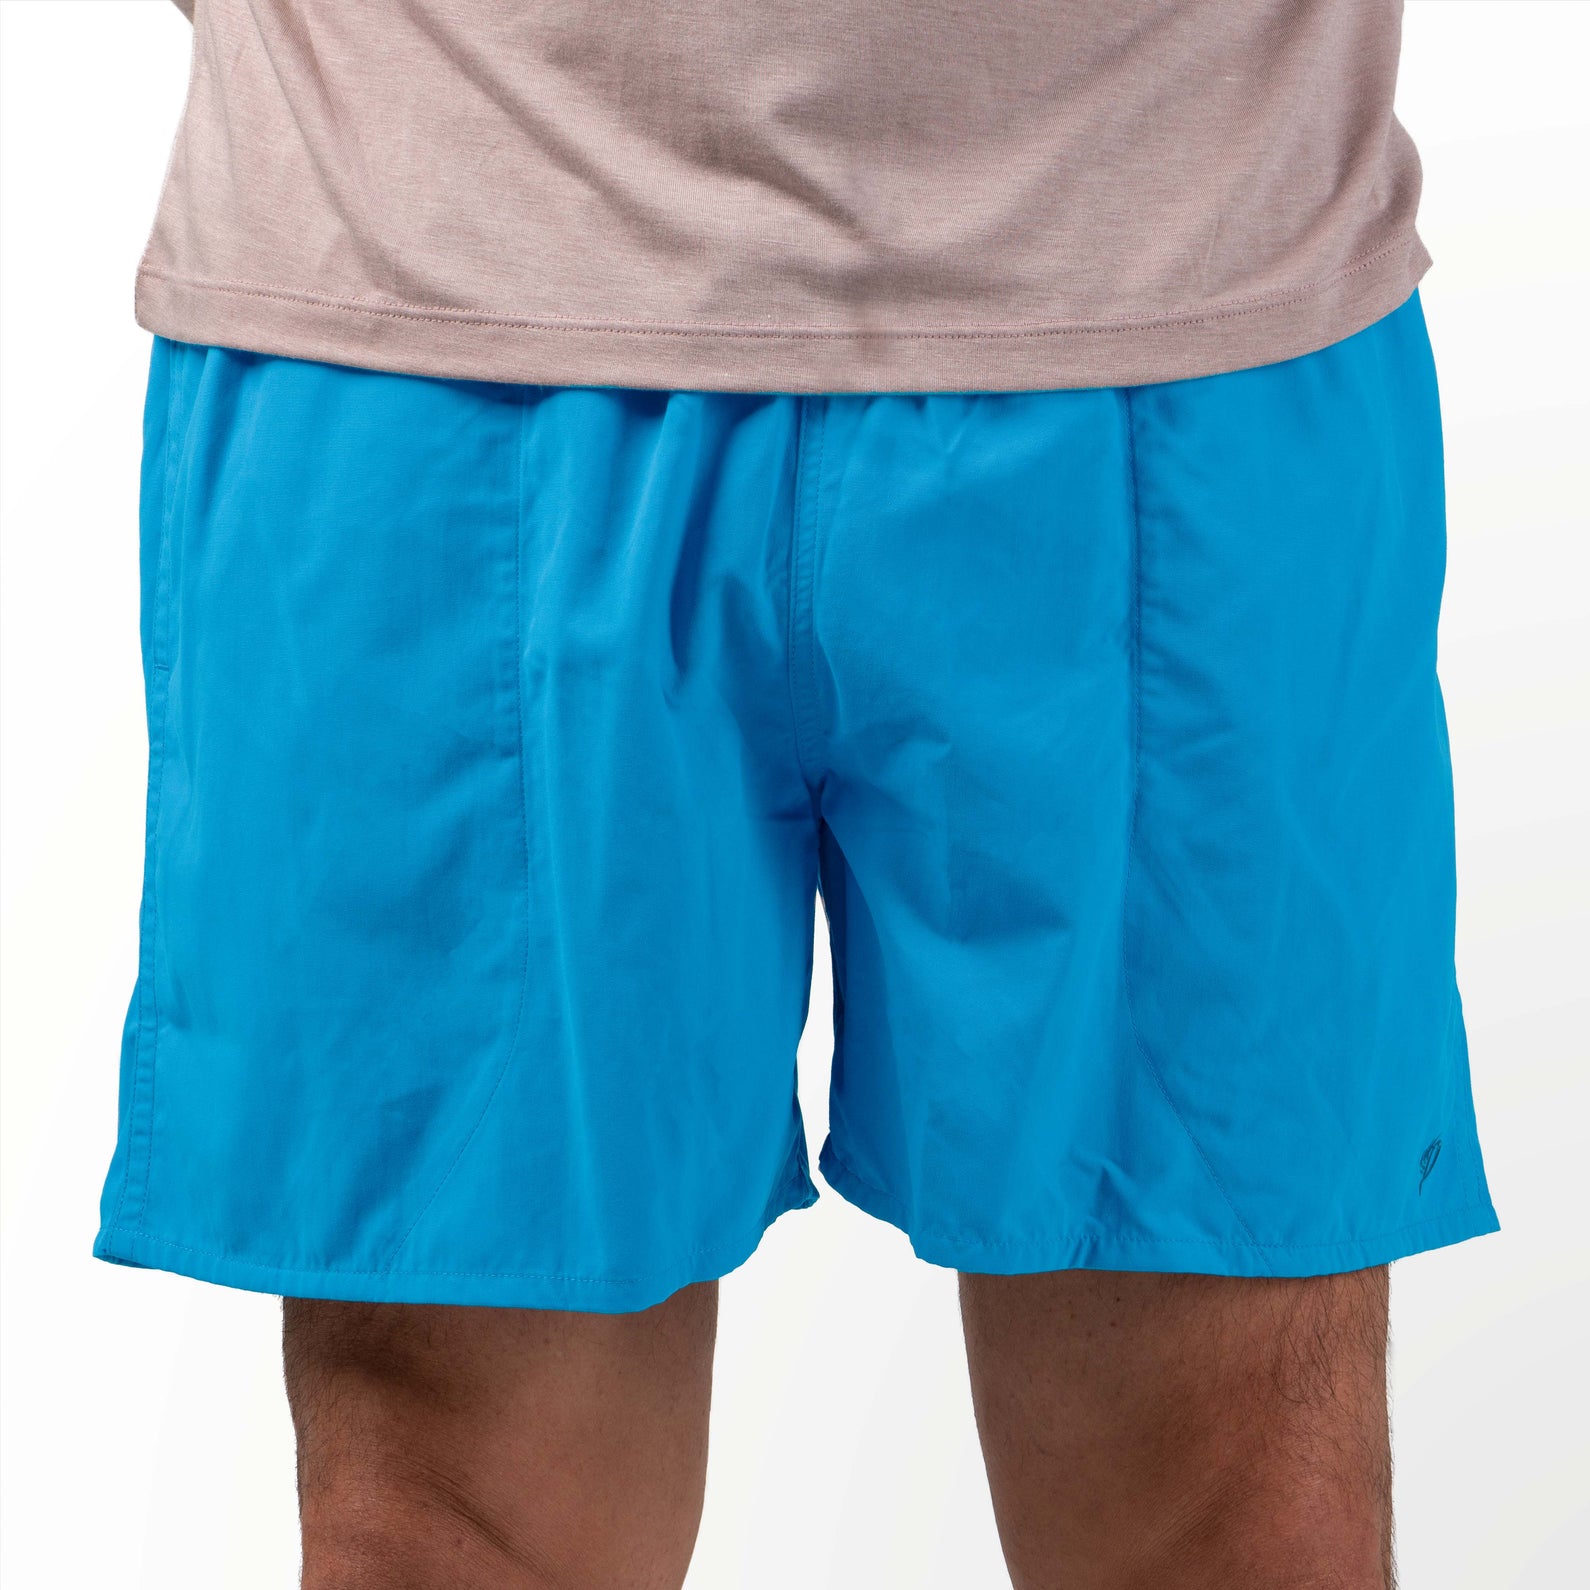 Scout Shorts 5" - Charter Blue